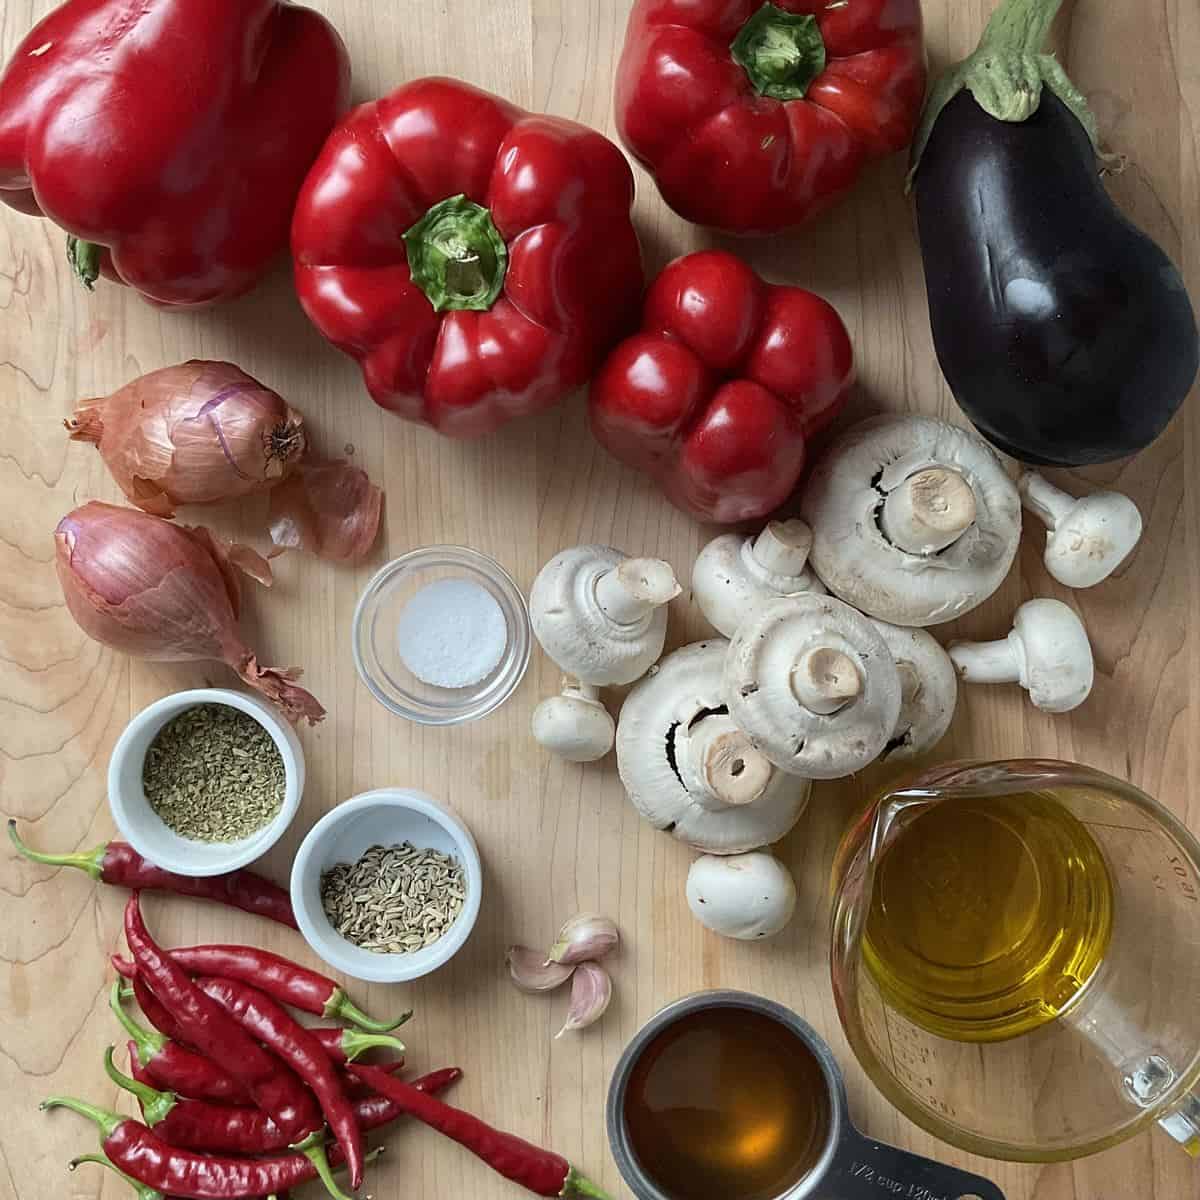 Ingredients to make hot spicy pepper spread.